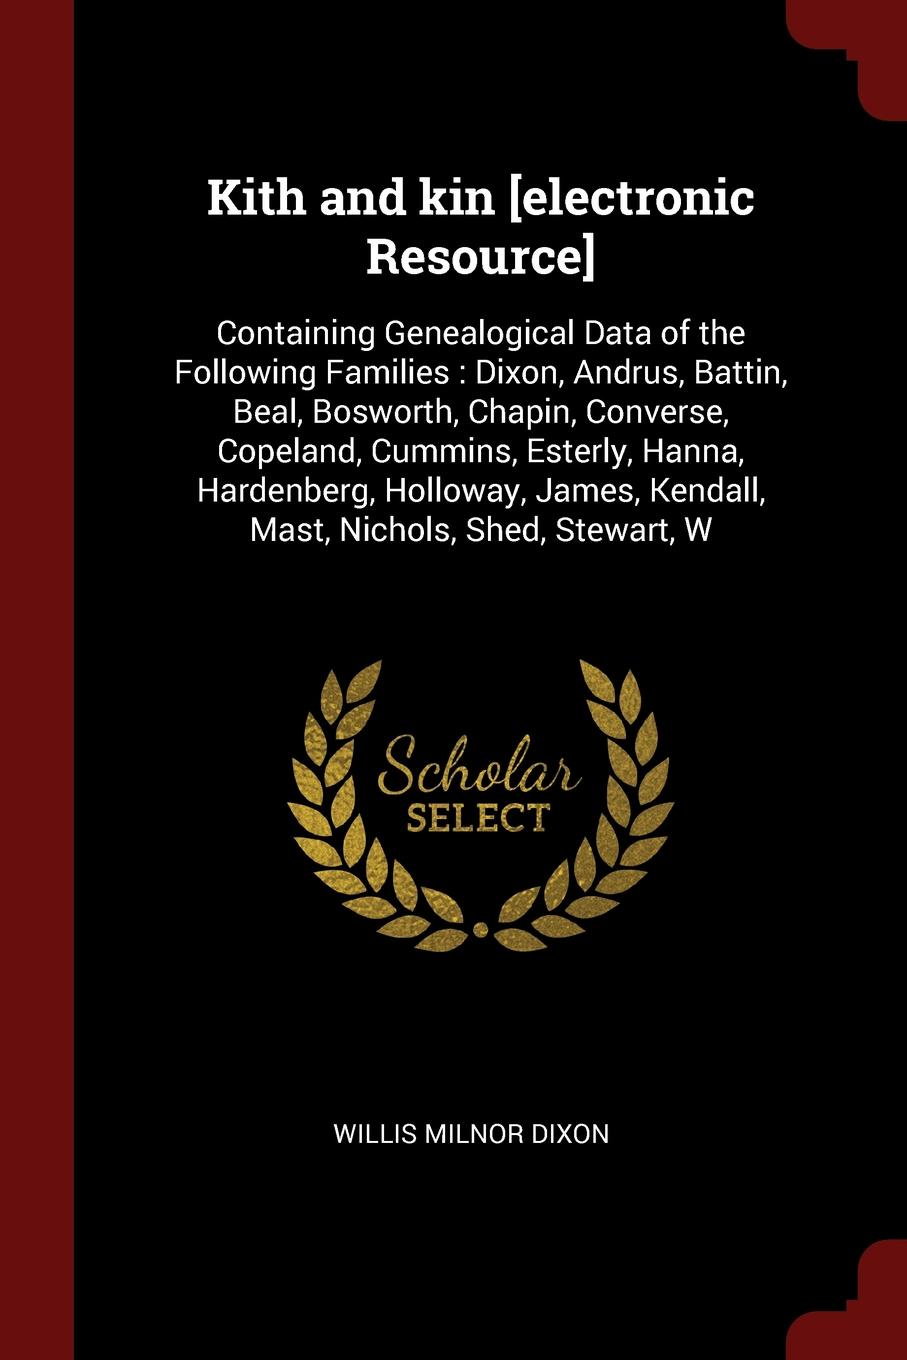 Kith and kin .electronic Resource.. Containing Genealogical Data of the Following Families : Dixon, Andrus, Battin, Beal, Bosworth, Chapin, Converse, Copeland, Cummins, Esterly, Hanna, Hardenberg, Holloway, James, Kendall, Mast, Nichols, Shed, Ste...